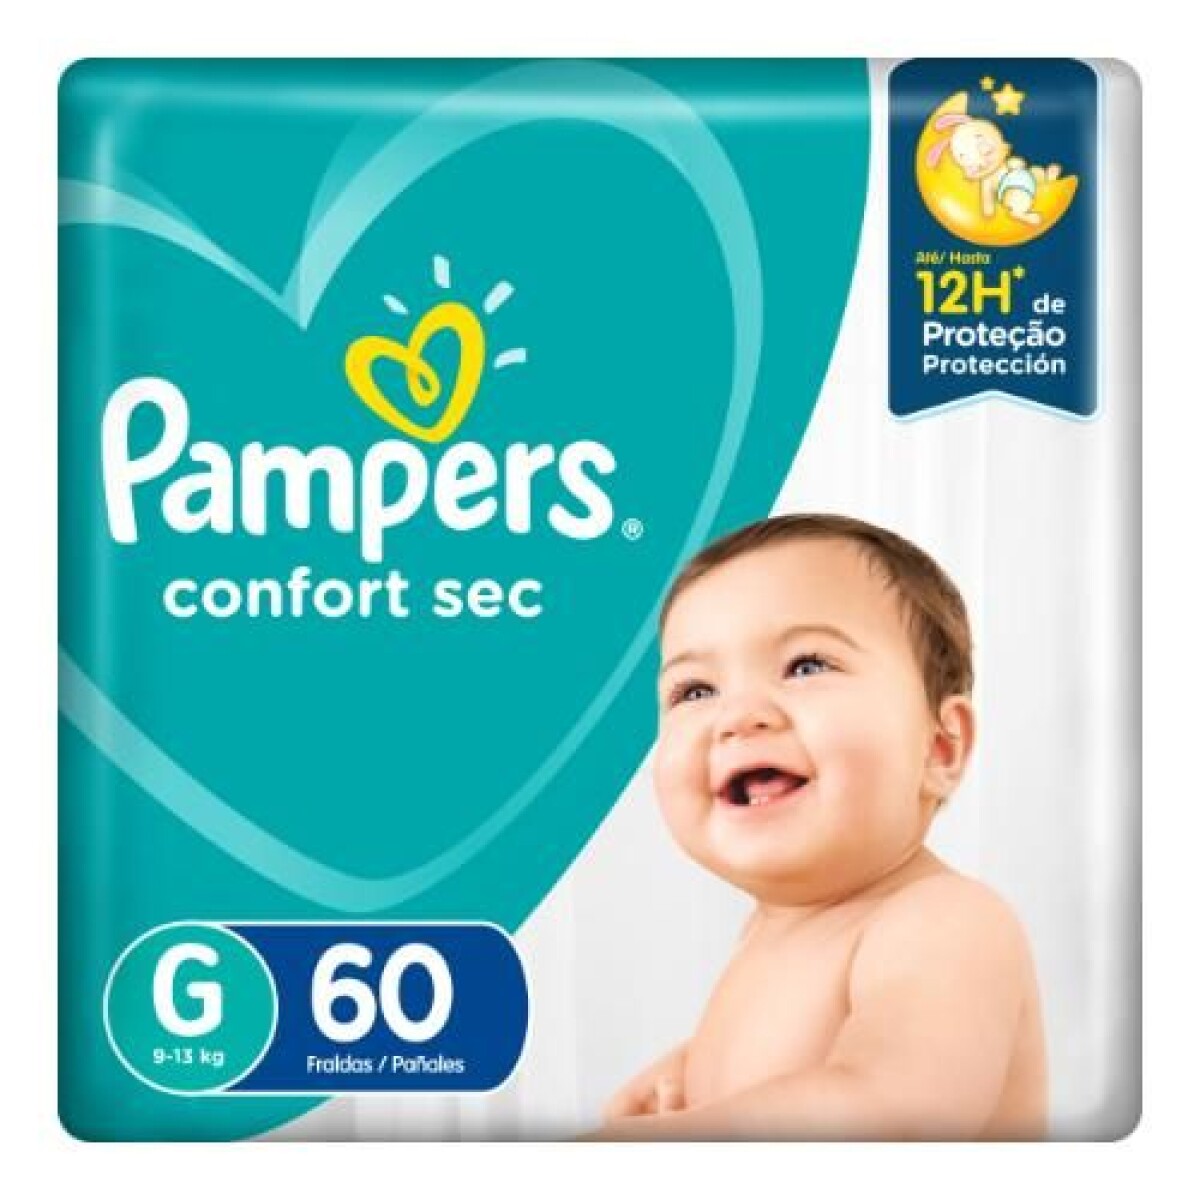 Pañales Pampers Confort Sec G 60 unidades 